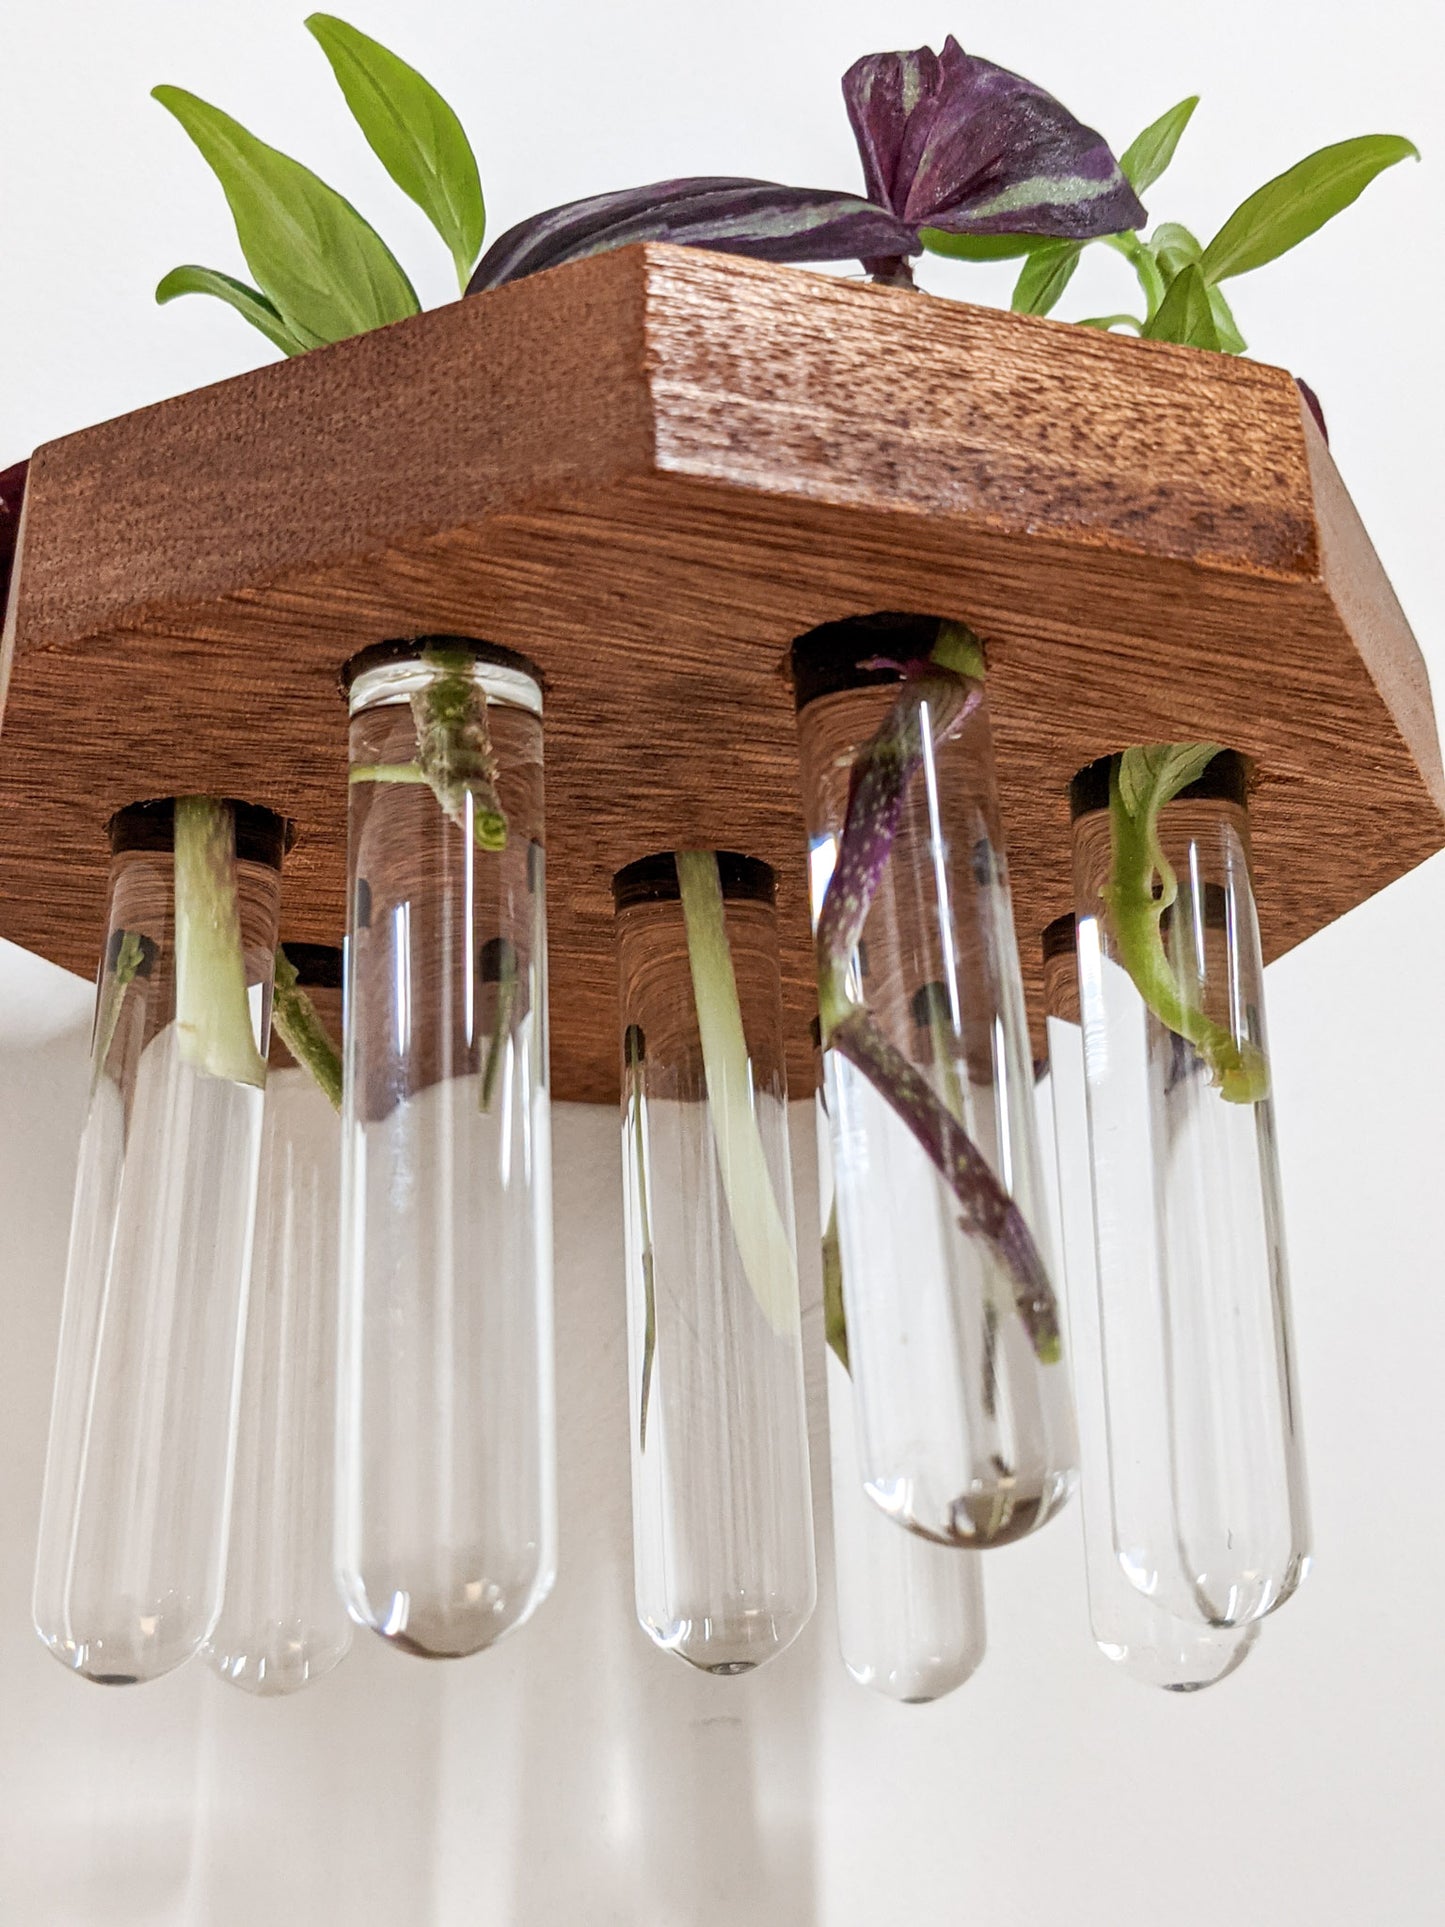 A close-up view of the hanging test tubes that are filled with water and hang from our Mahogany small wooden propagation shelf. Rooted cuttings of wandering jew and a pothos peak over the top edge of the shelf.